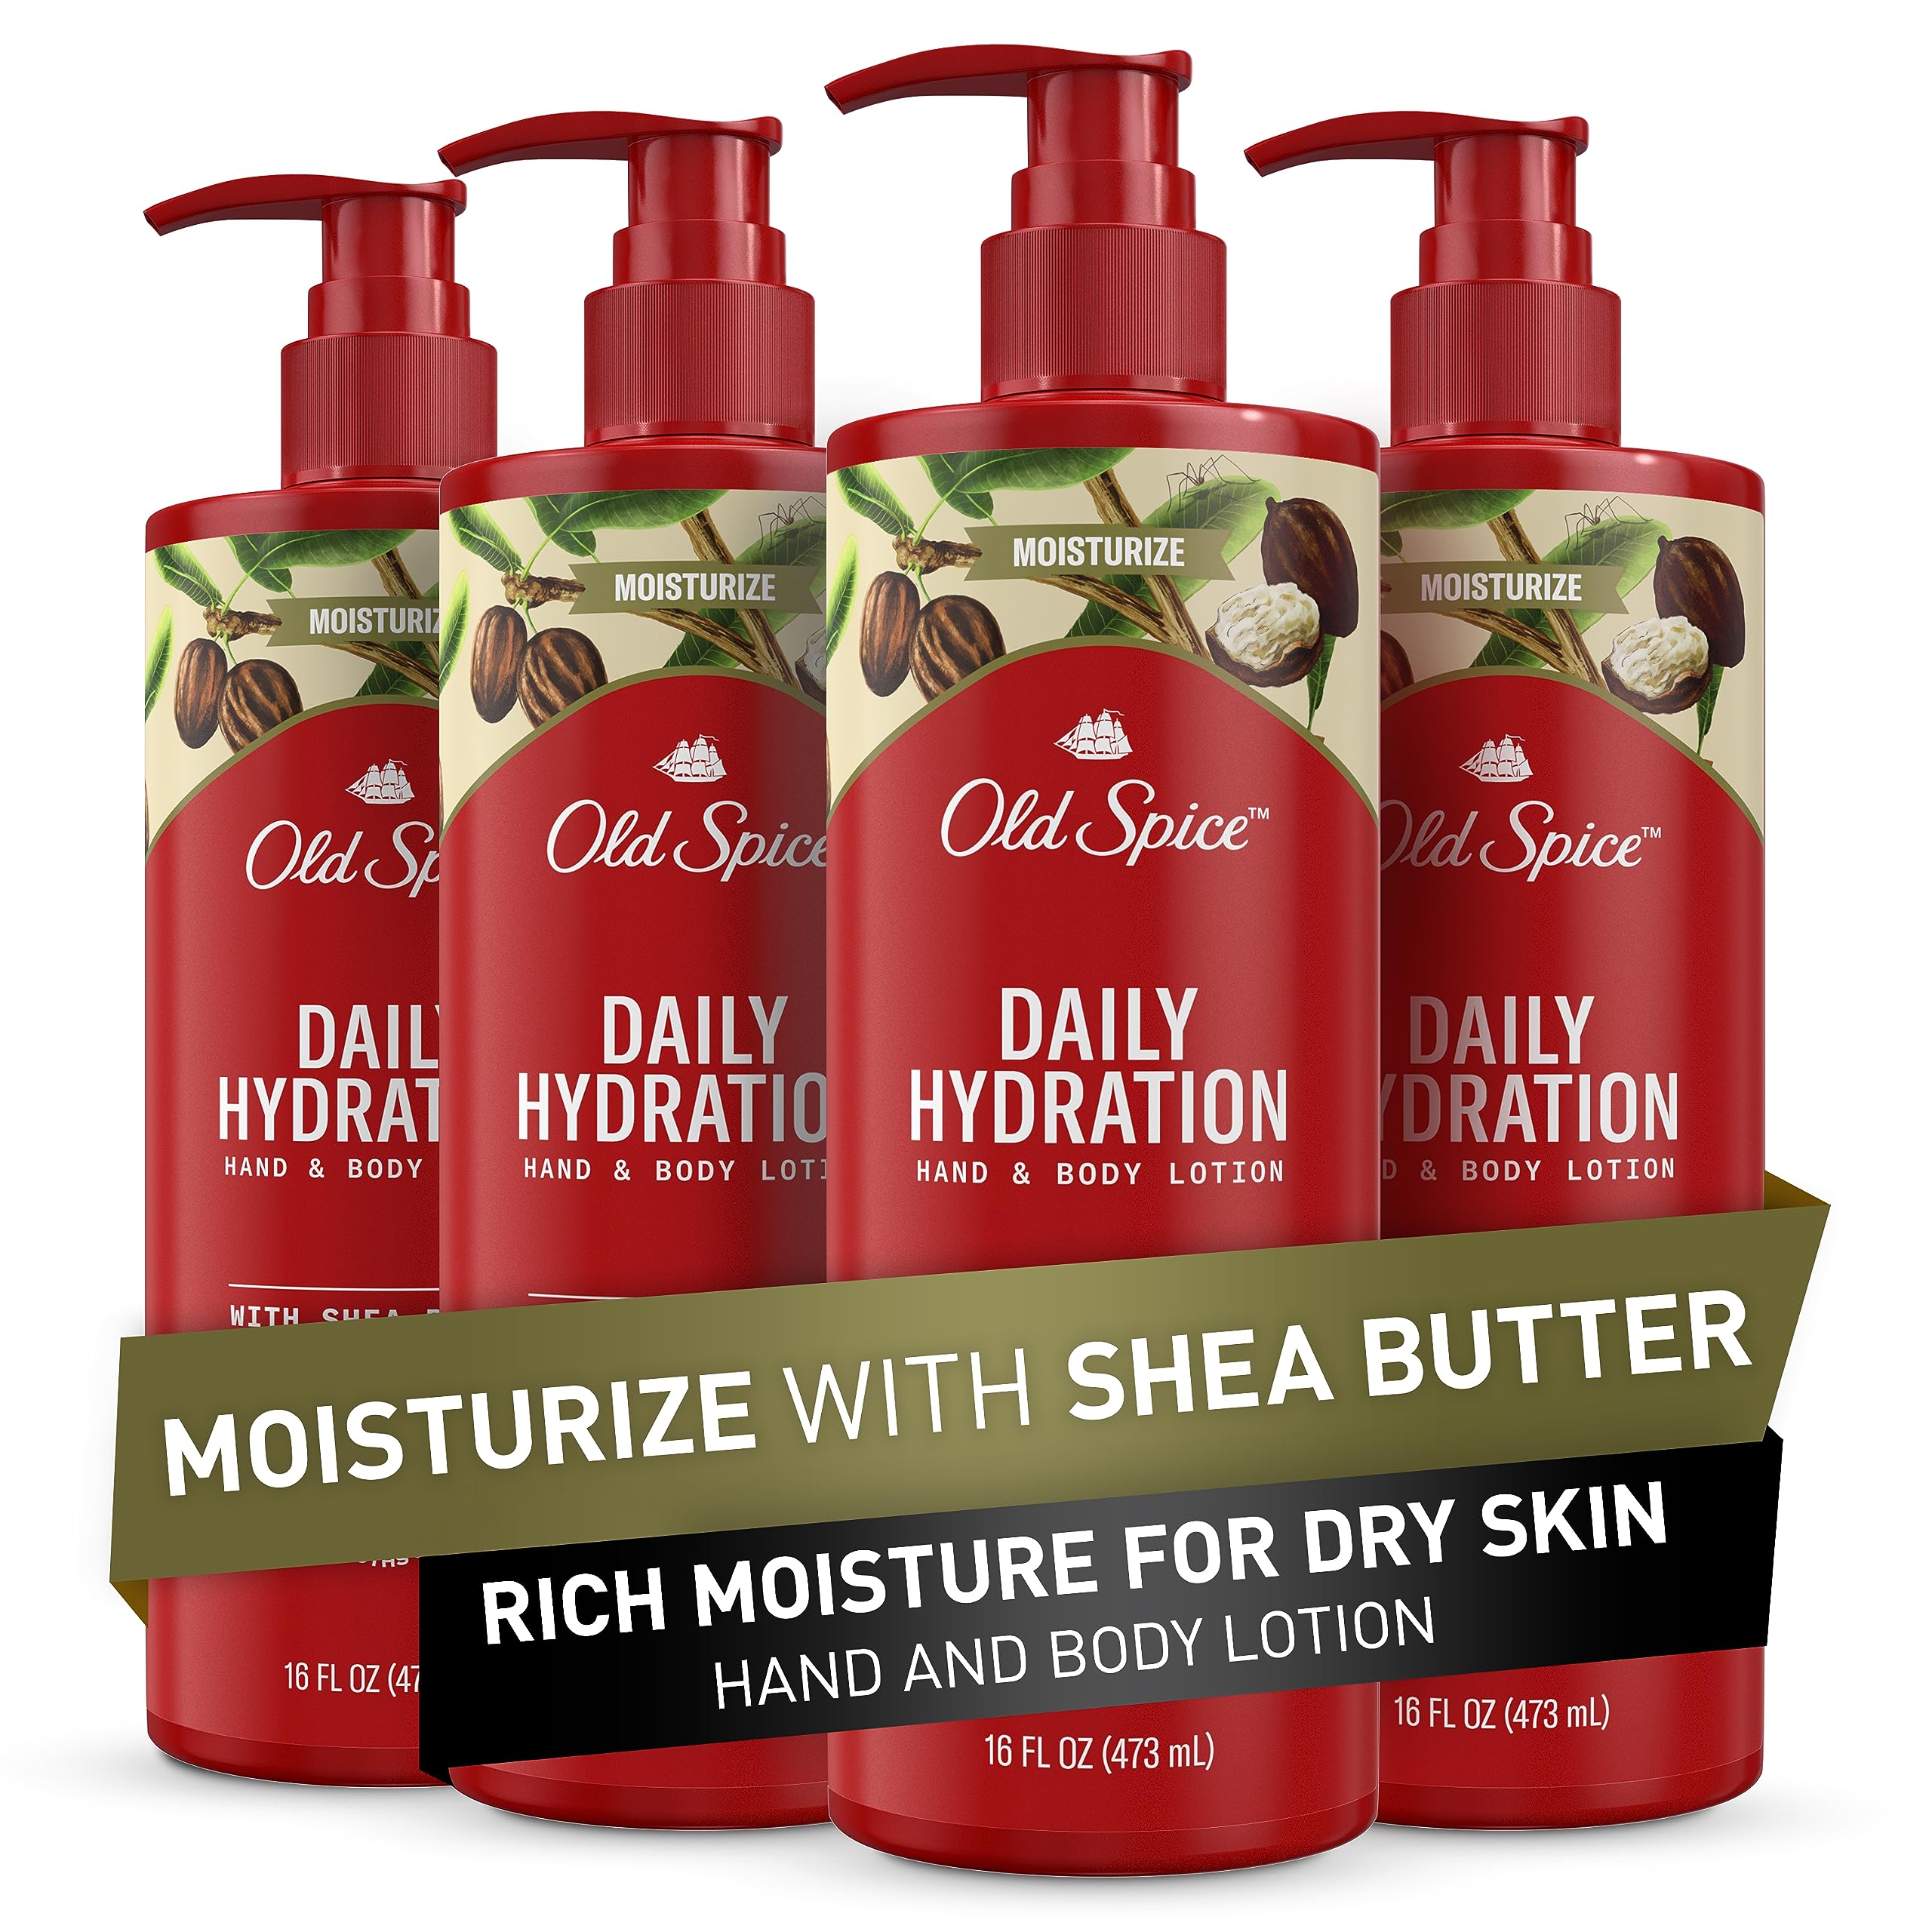 Old Spice Daily Hydration Hand & Body Lotion for Men With Shea Butter (Pack of 4) 16 Fl Oz